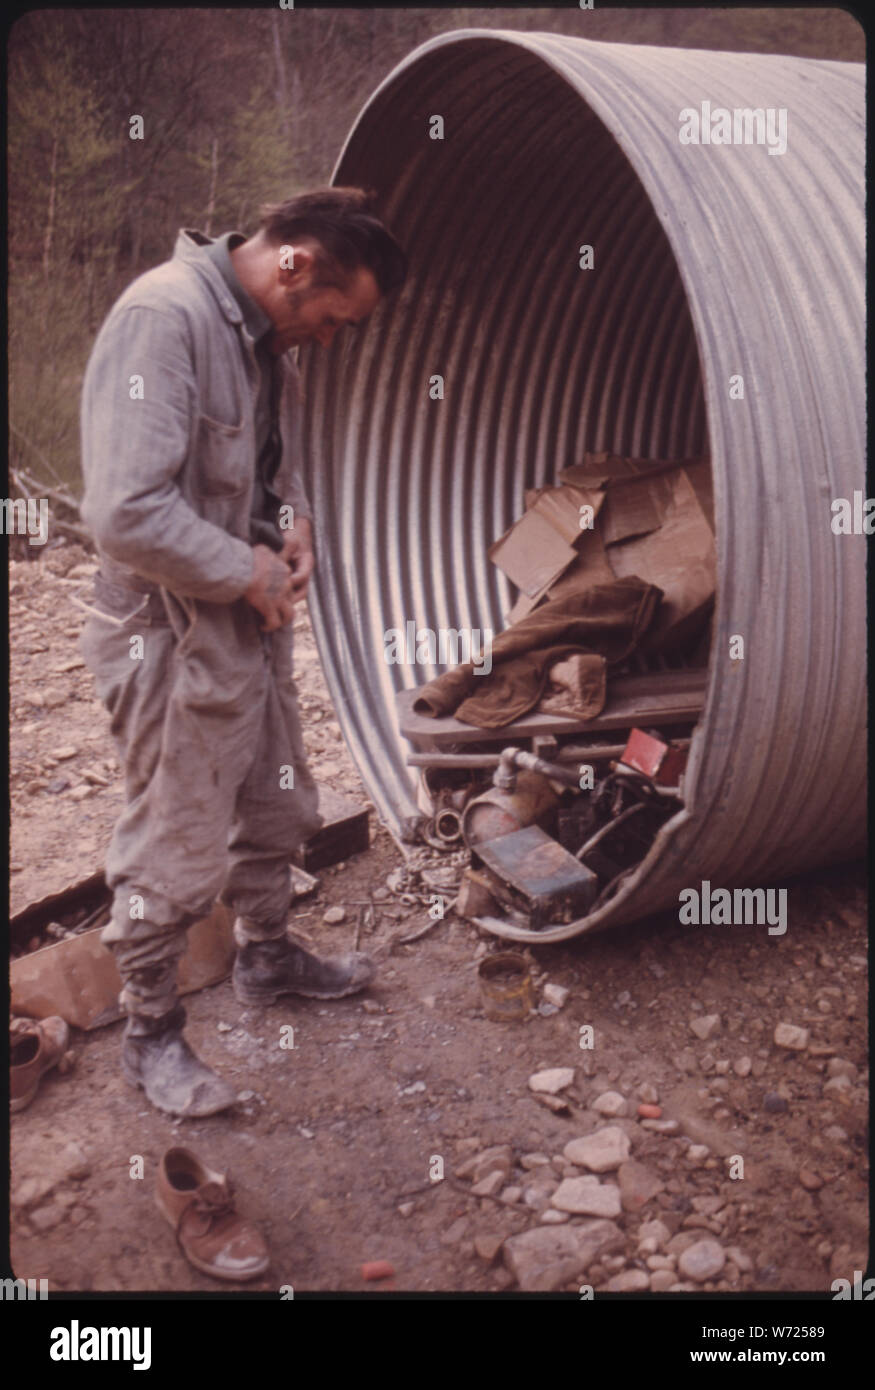 DOREN BISHOP, SUPERINTENDENT FOR ROBIN MINES OWNED BY THE ALMA COAL CORPORATION NEAR CLOTHIER AND MADISON, WEST VIRGINIA PUTS ON MINING COVERALLS NEXT TO A METAL CULVERT. HE IS SUPERVISING A NEW MINE WHICH HASN'T YET GONE INTO PRODUCTION, AND THE MINER SHOWER ROOMS ARE NOT FINISHED Stock Photo